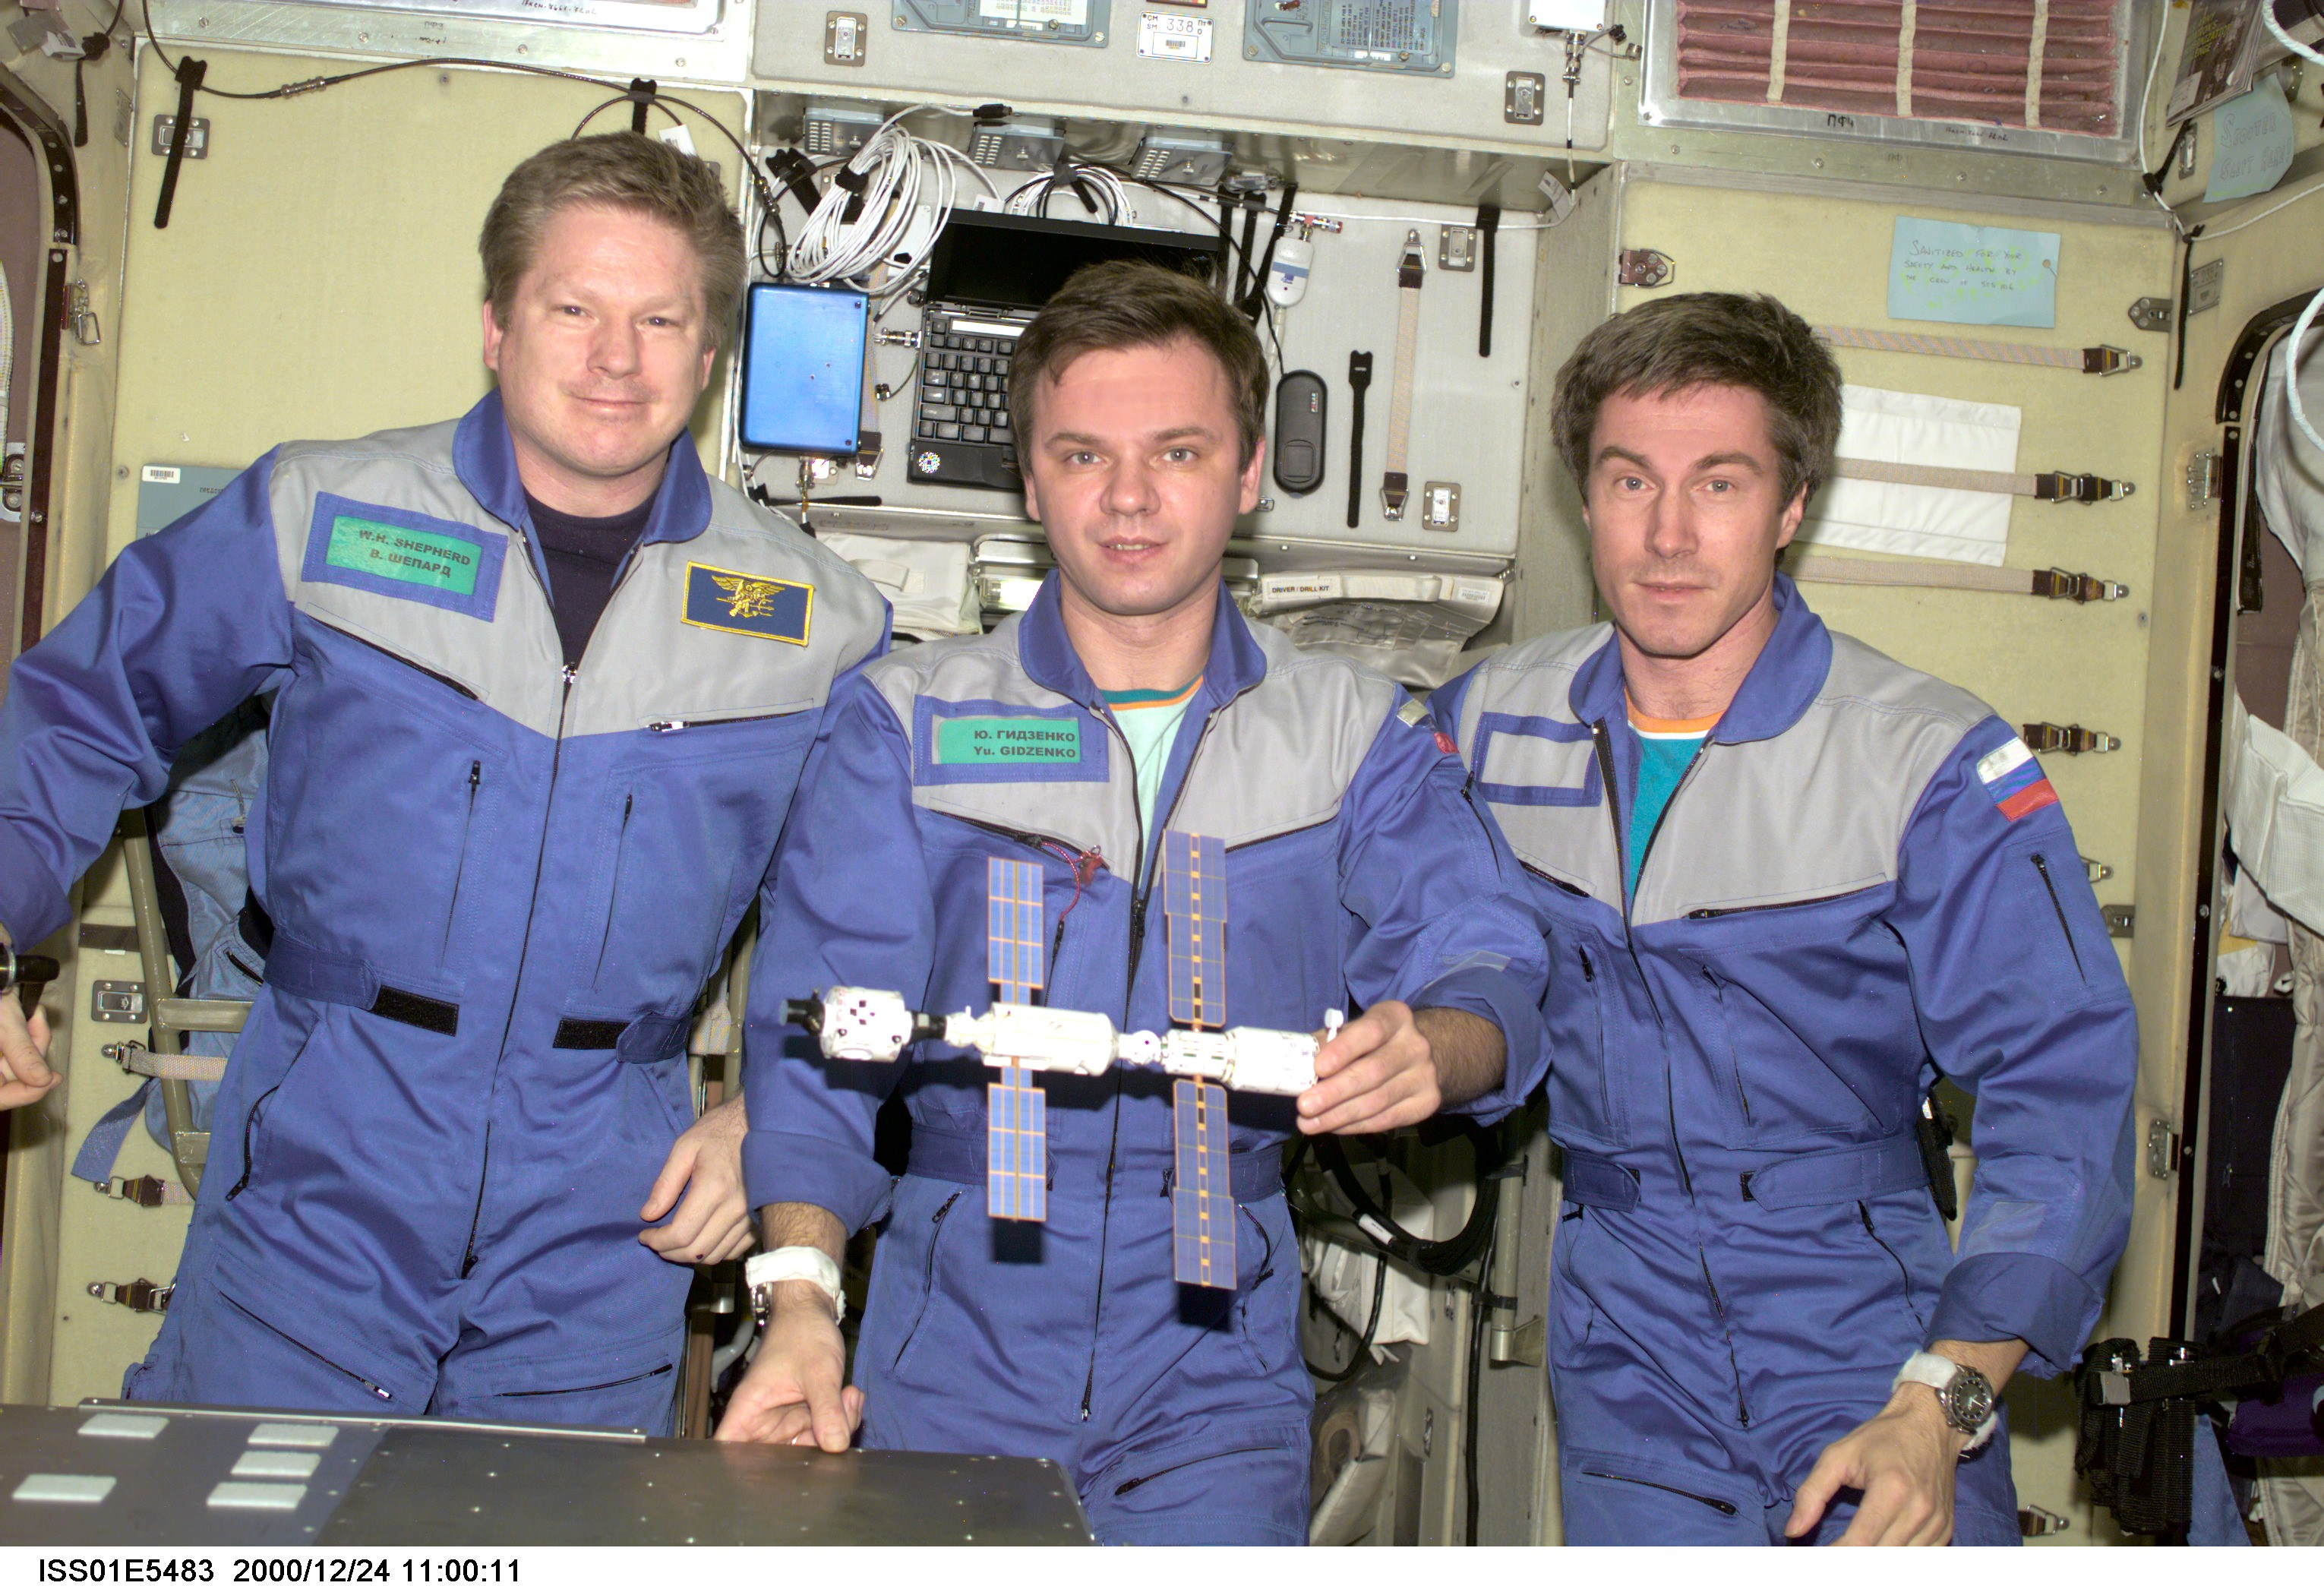 In this photo, Expedition 1 crew members (from left to right) Commander Bill Shepherd, and Flight Engineers Yuri Gidzenko and Sergei Krikalev pose with a model of their home away from home.  Image Credit: NASA